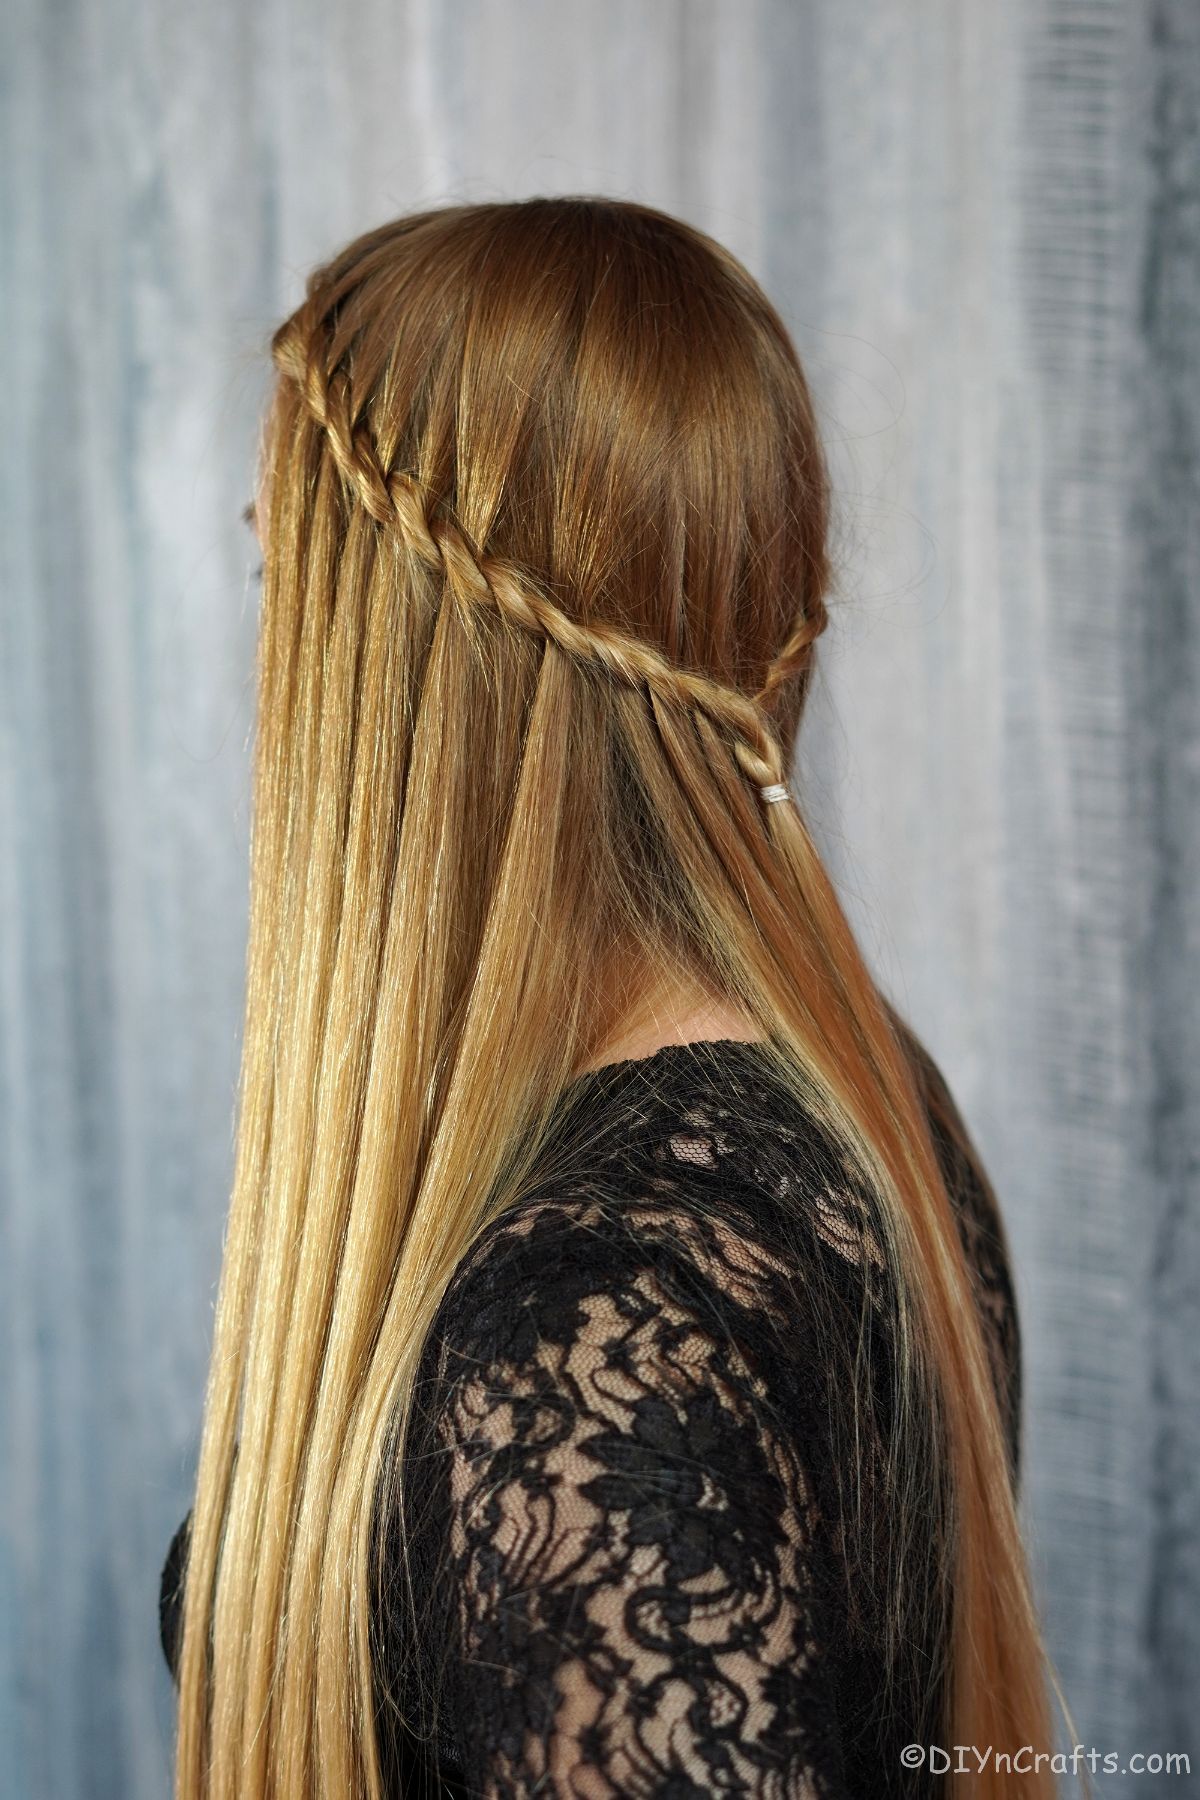 woman in black shirt with waterfall braid on back of hair